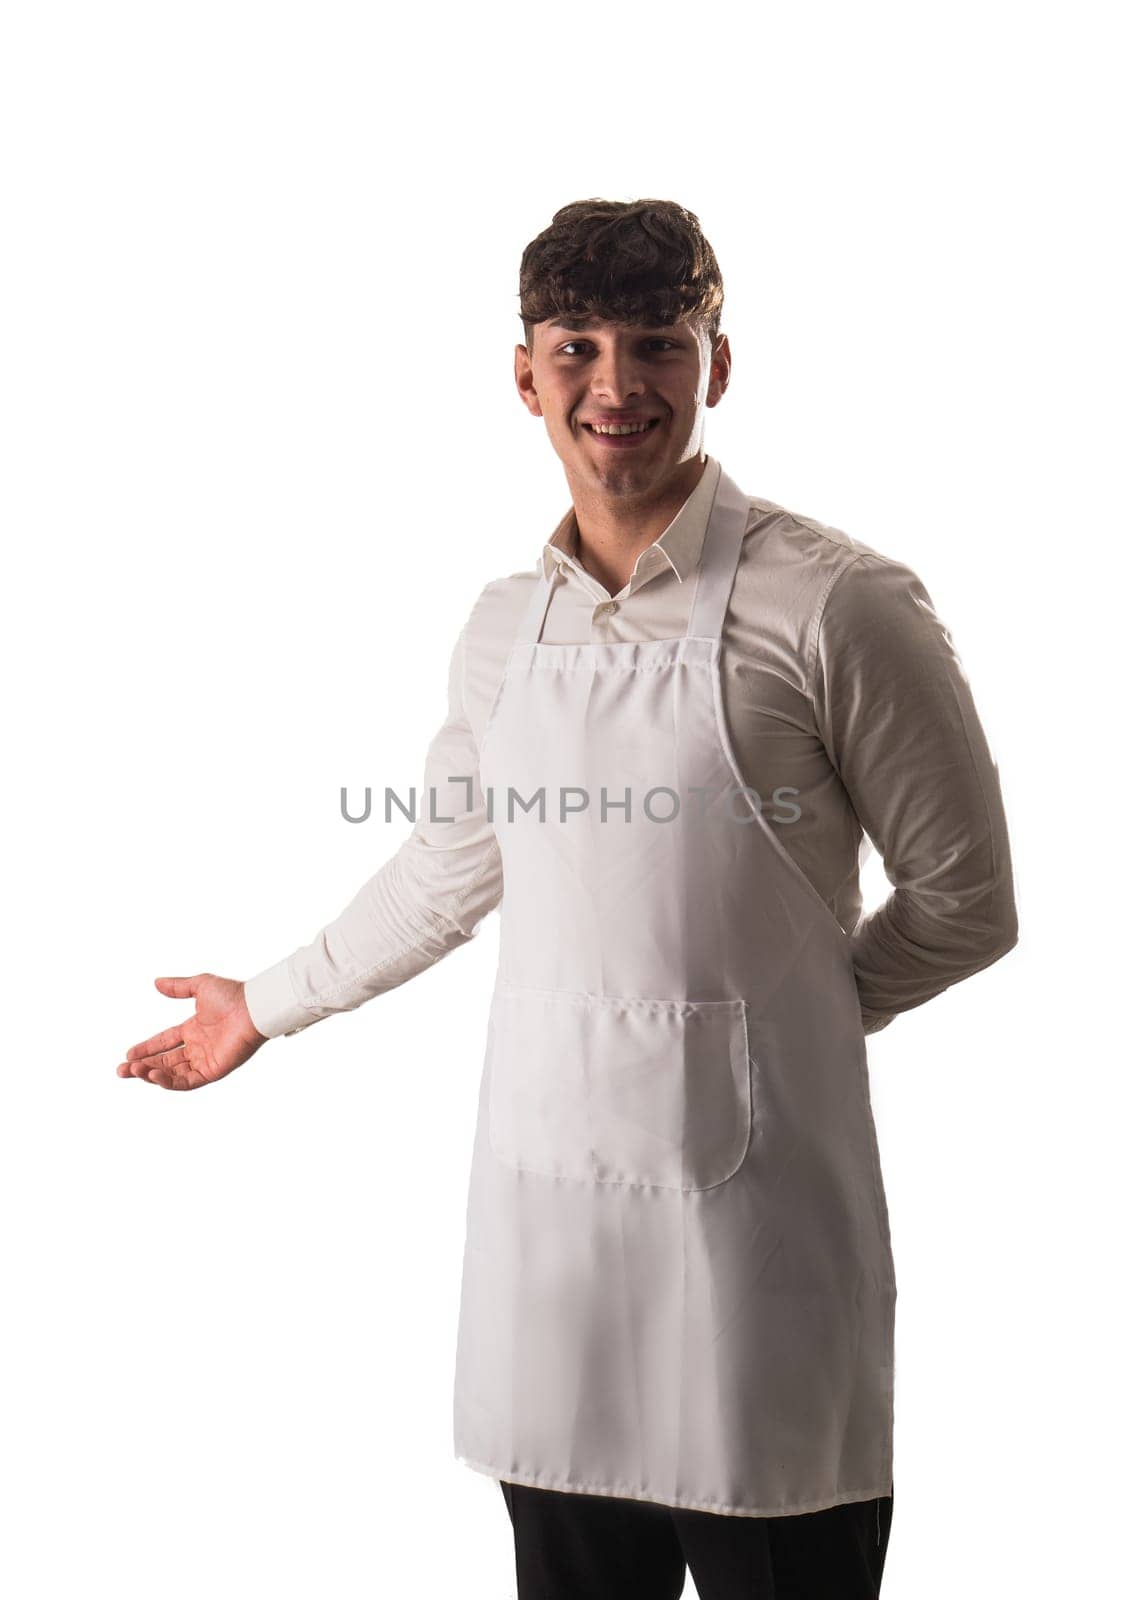 Young chef or waiter posing, wearing white apron and white shirt isolated on white background, welcoming people into the restaurant with a smile